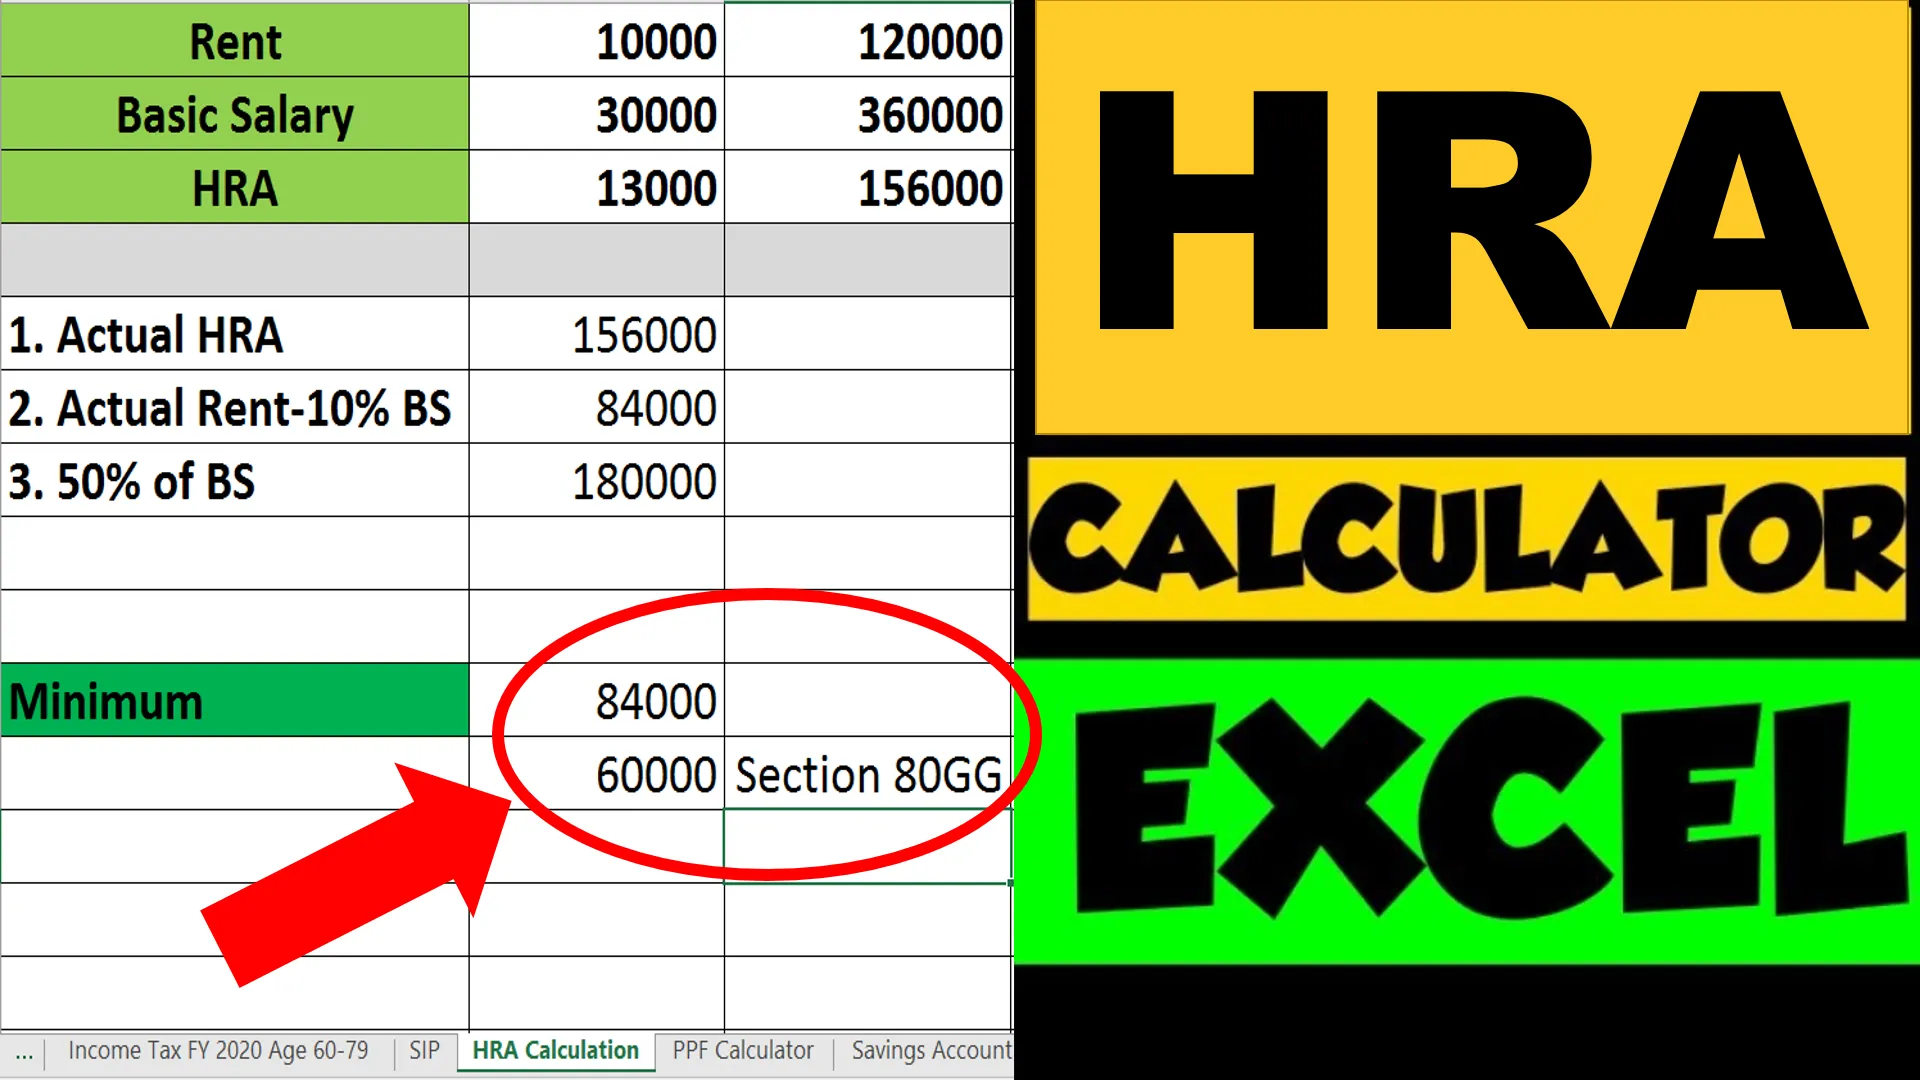 hra-calculation-in-income-tax-house-rent-allowance-calculator-hot-sex